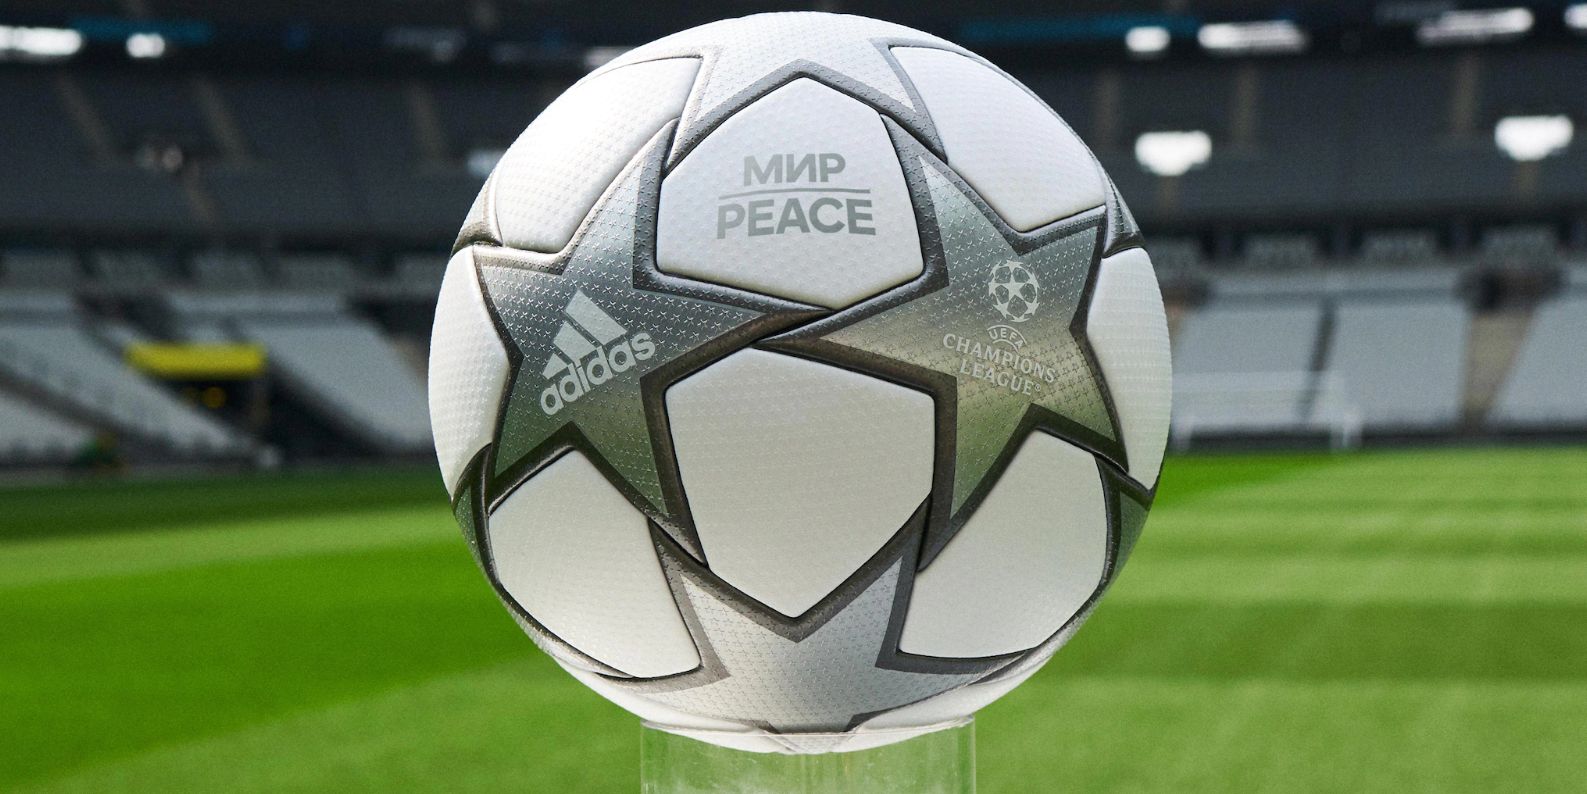 Paris Champions League final ball is sold more than £20,000